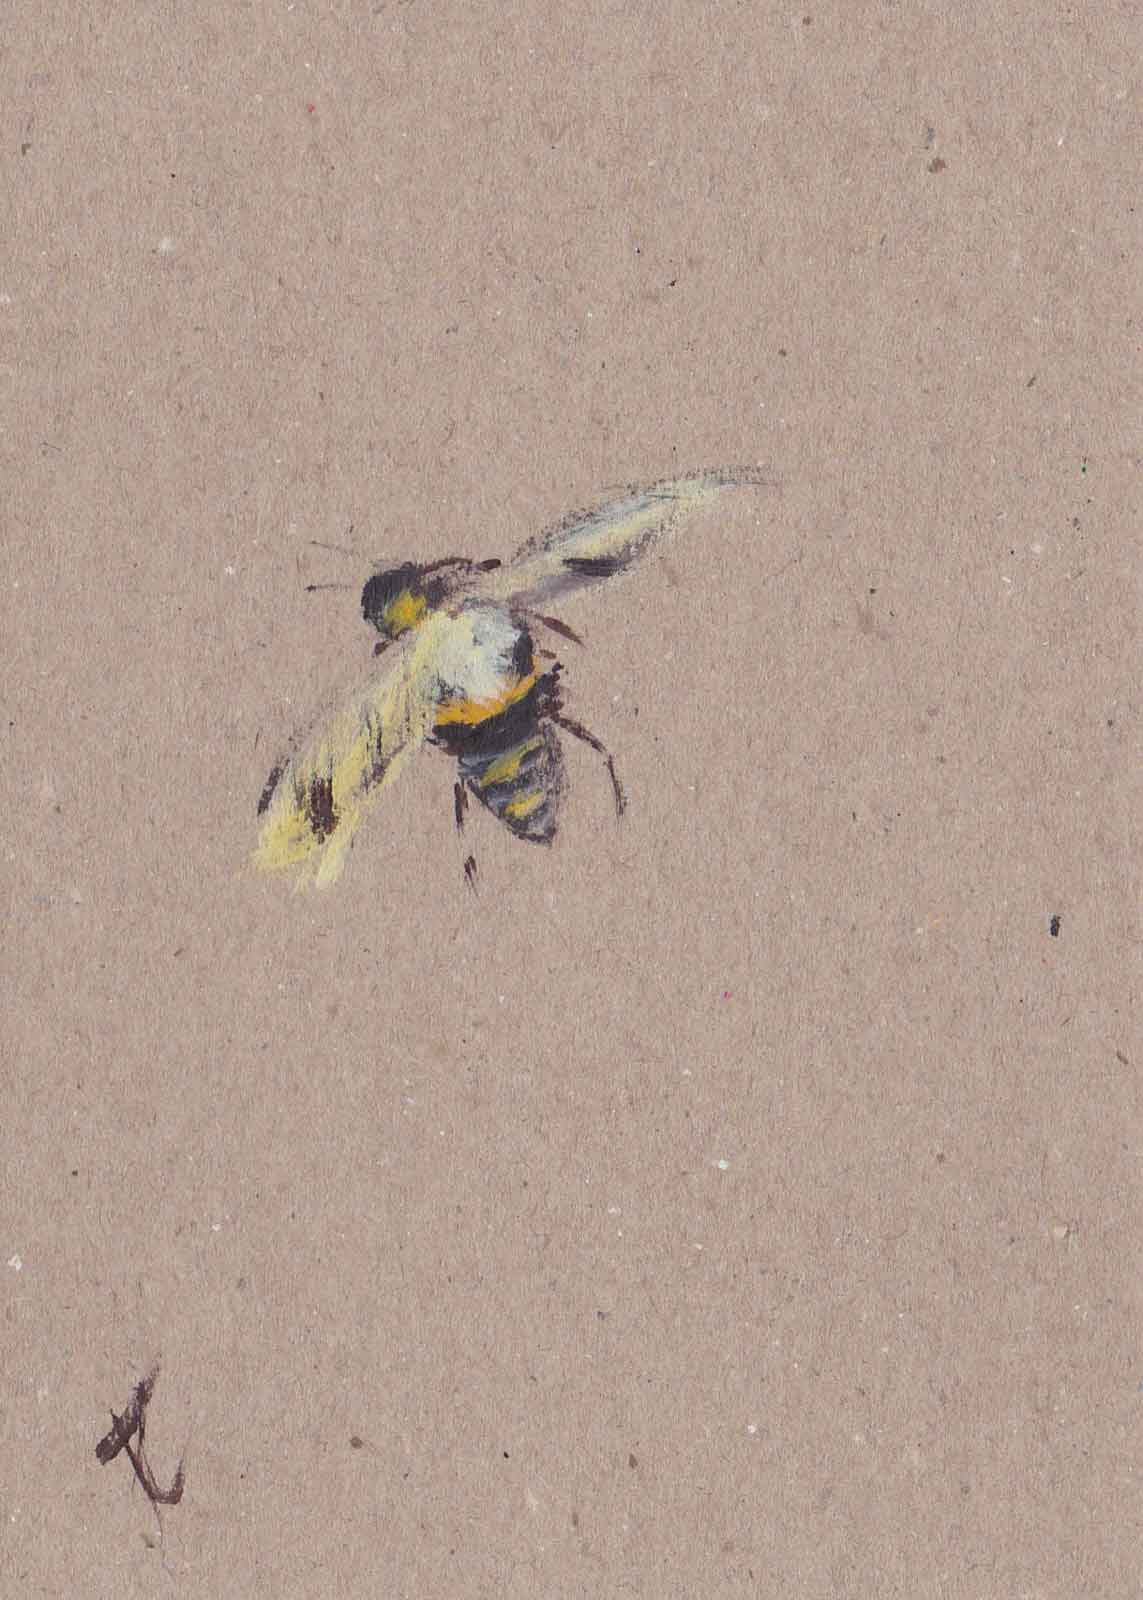 Hand-painted bee buzz note card